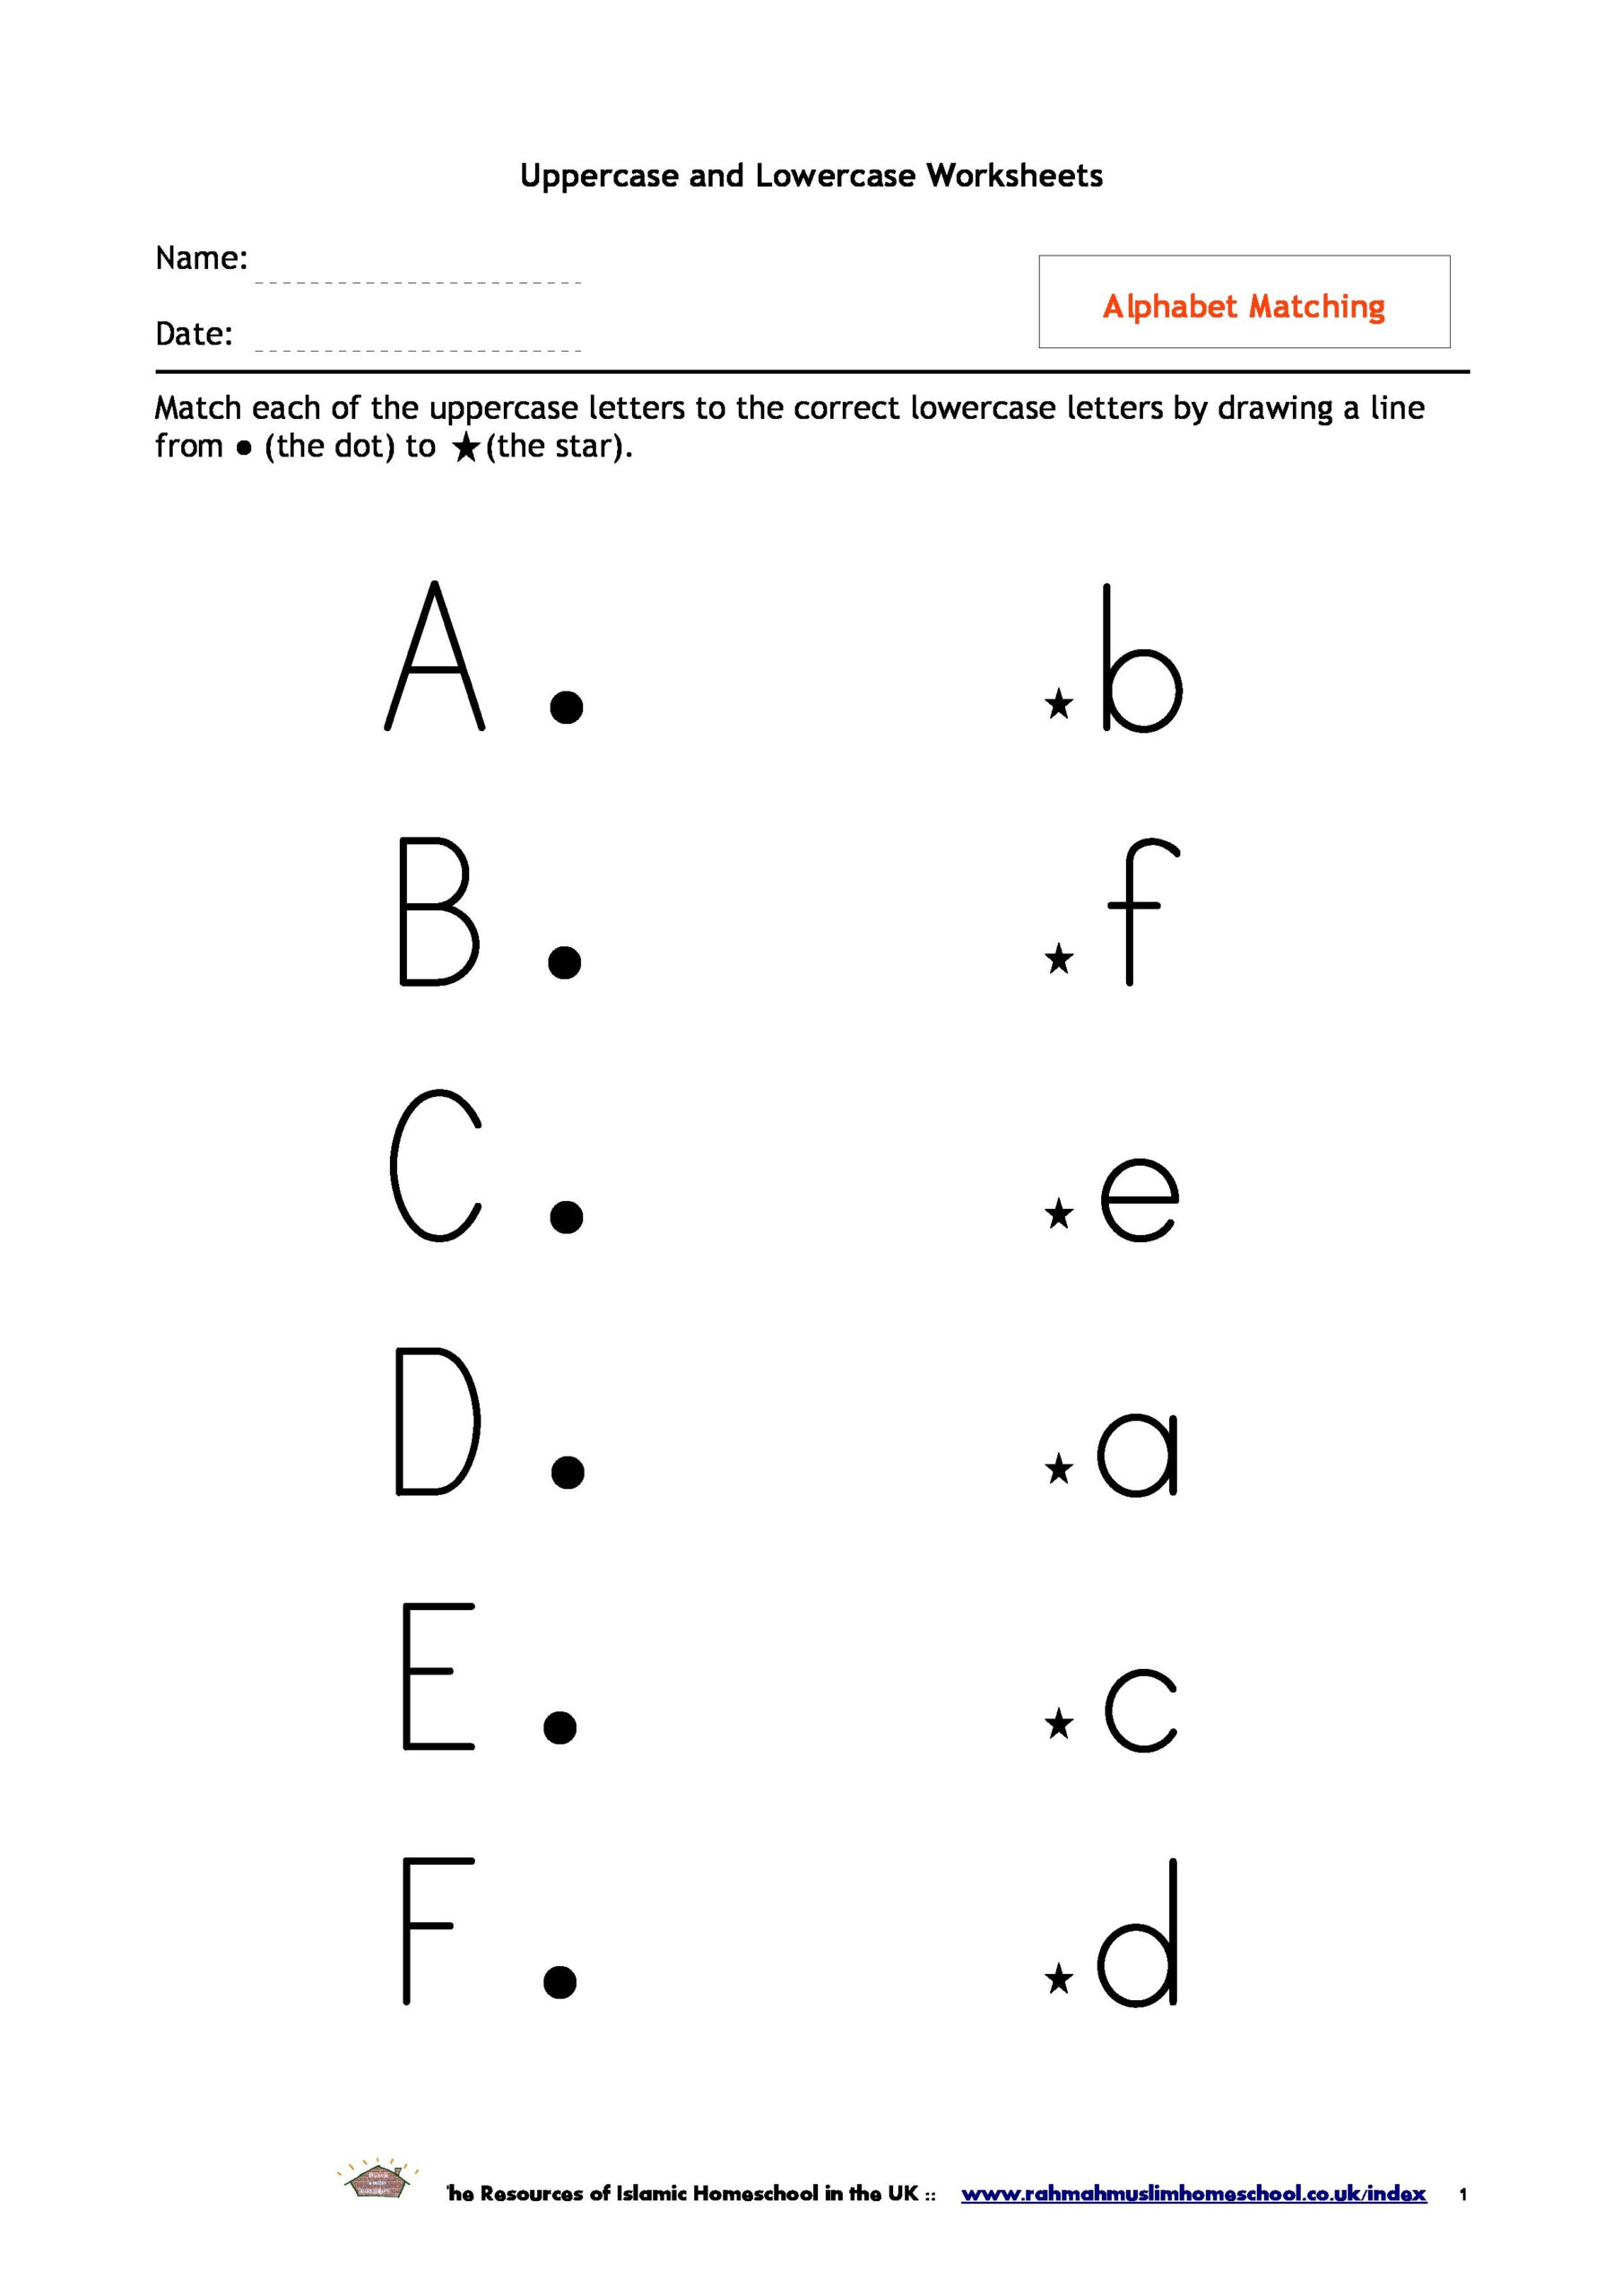 Alphabet+Uppercase+And+Lowercase+Matching+Worksheet In 2020 regarding Alphabet Matching Worksheets For Preschoolers